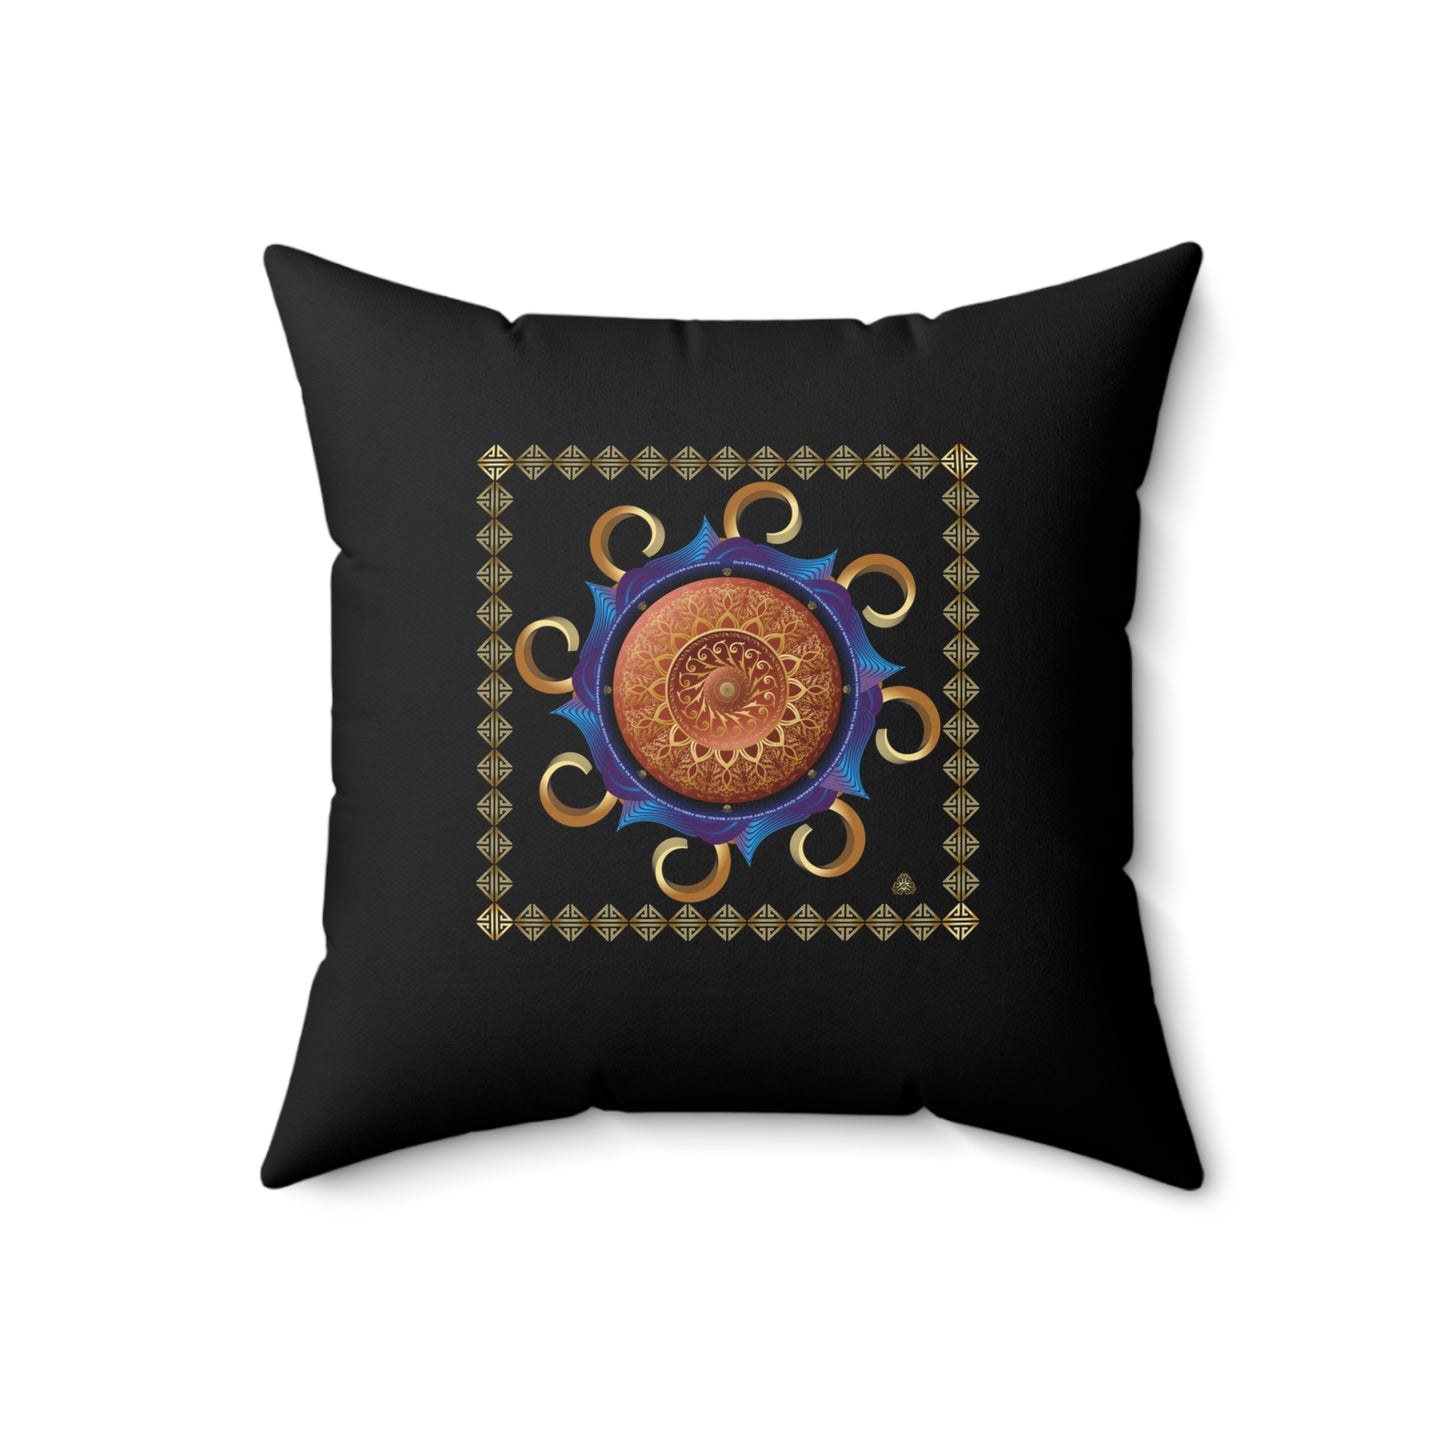 Spun Polyester Square Pillow  Kukloso OVC 4277/4292 'Lord's Prayer' - Free Shipping